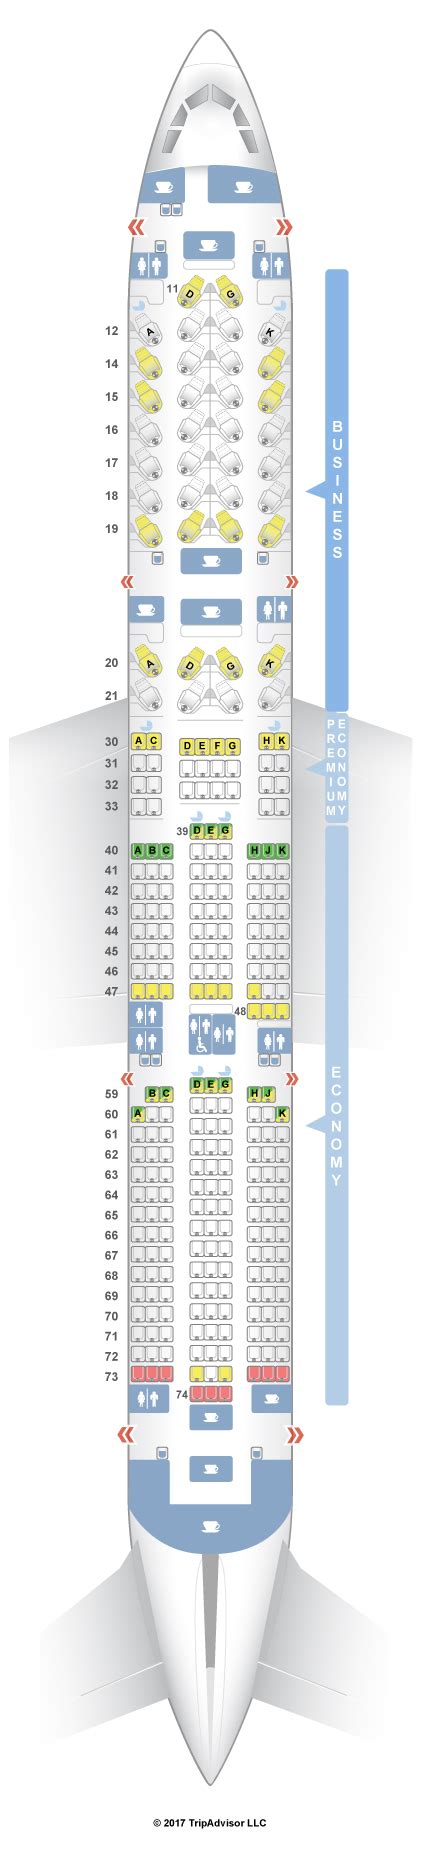 Airbus A350 900 Singapore Airlines Seat Map Image To U